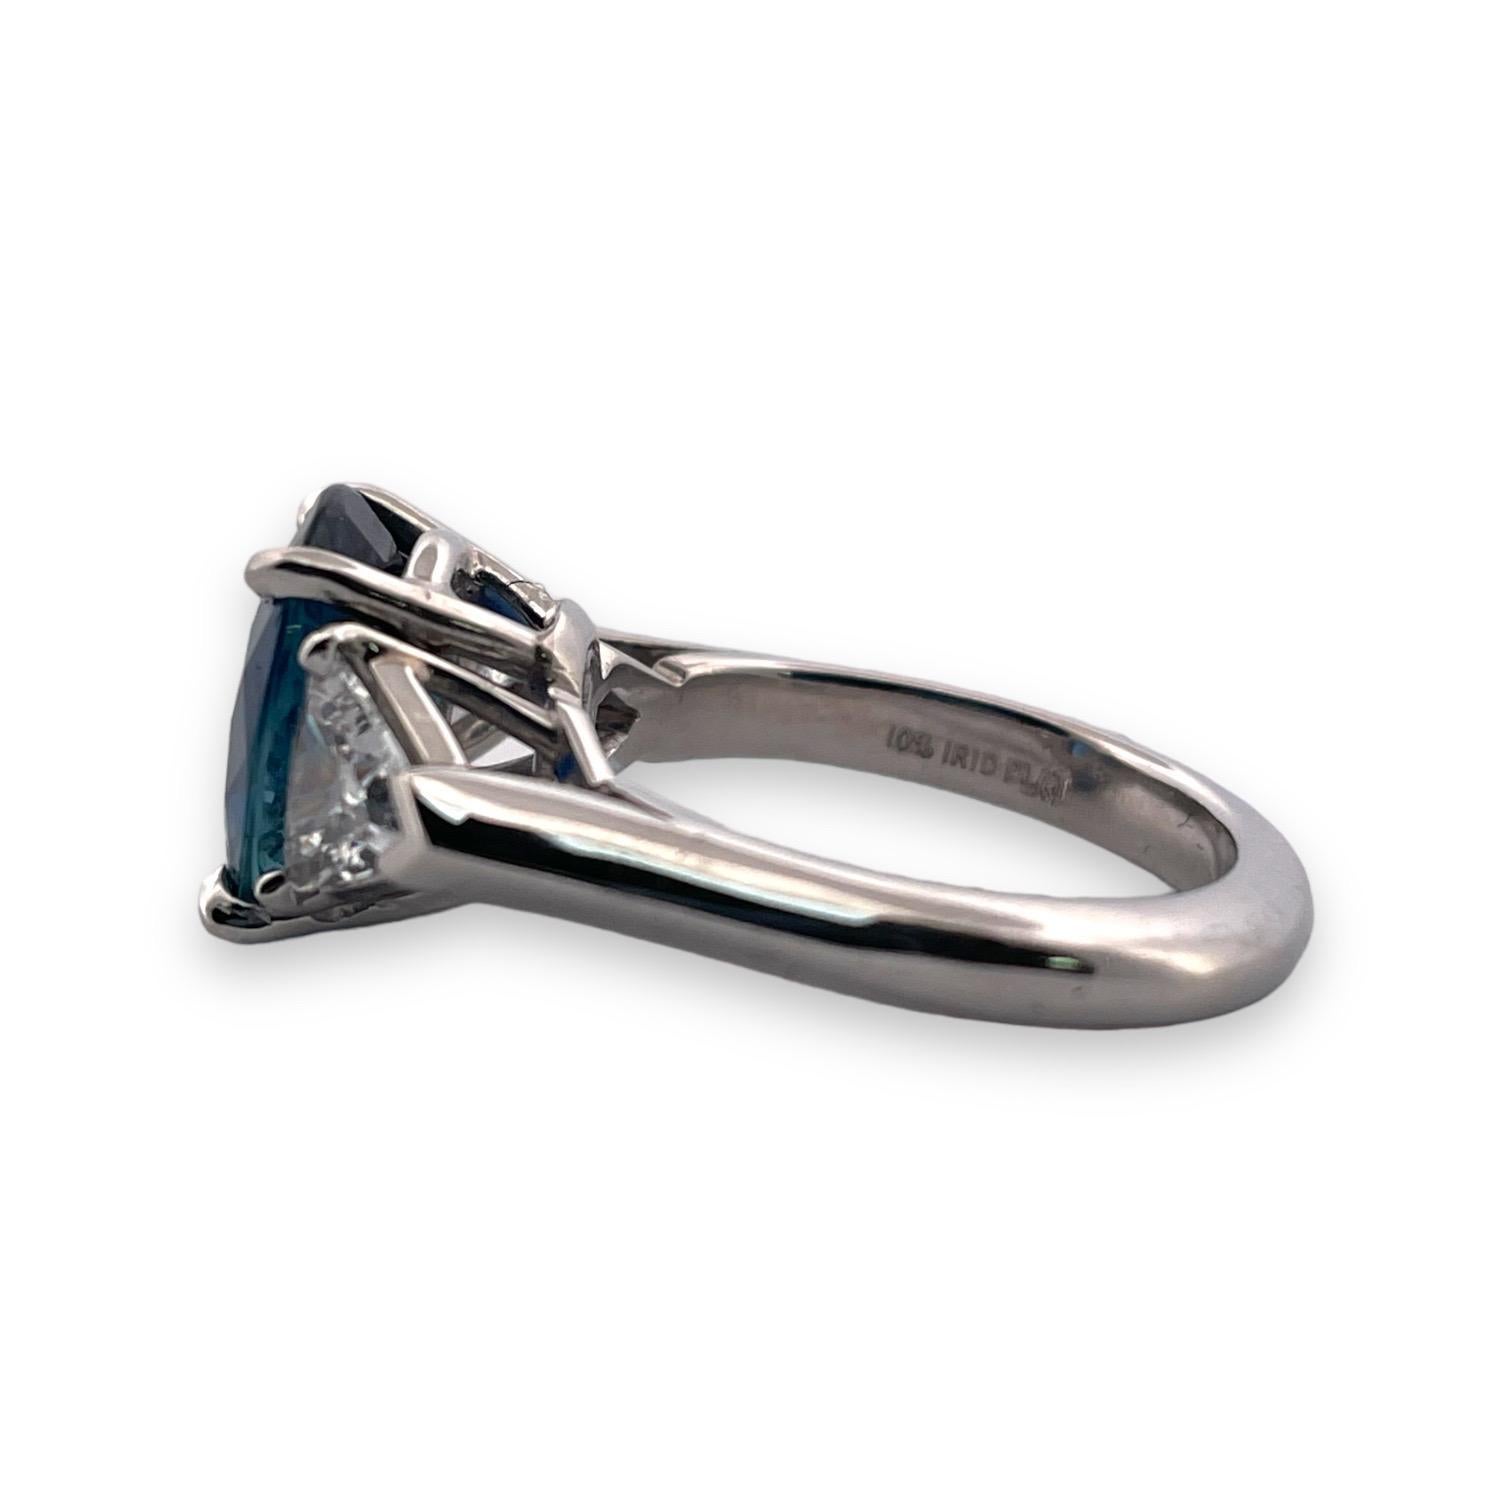 Unveil the splendor of a 3.64 carat Cylon sapphire, heat-treated to enhance its deep blue allure, flanked by 1.20 carat of immaculate trillion cut diamonds. This size 5.75 platinum ring, celebrating the pinnacle of luxury with D color and SI quality